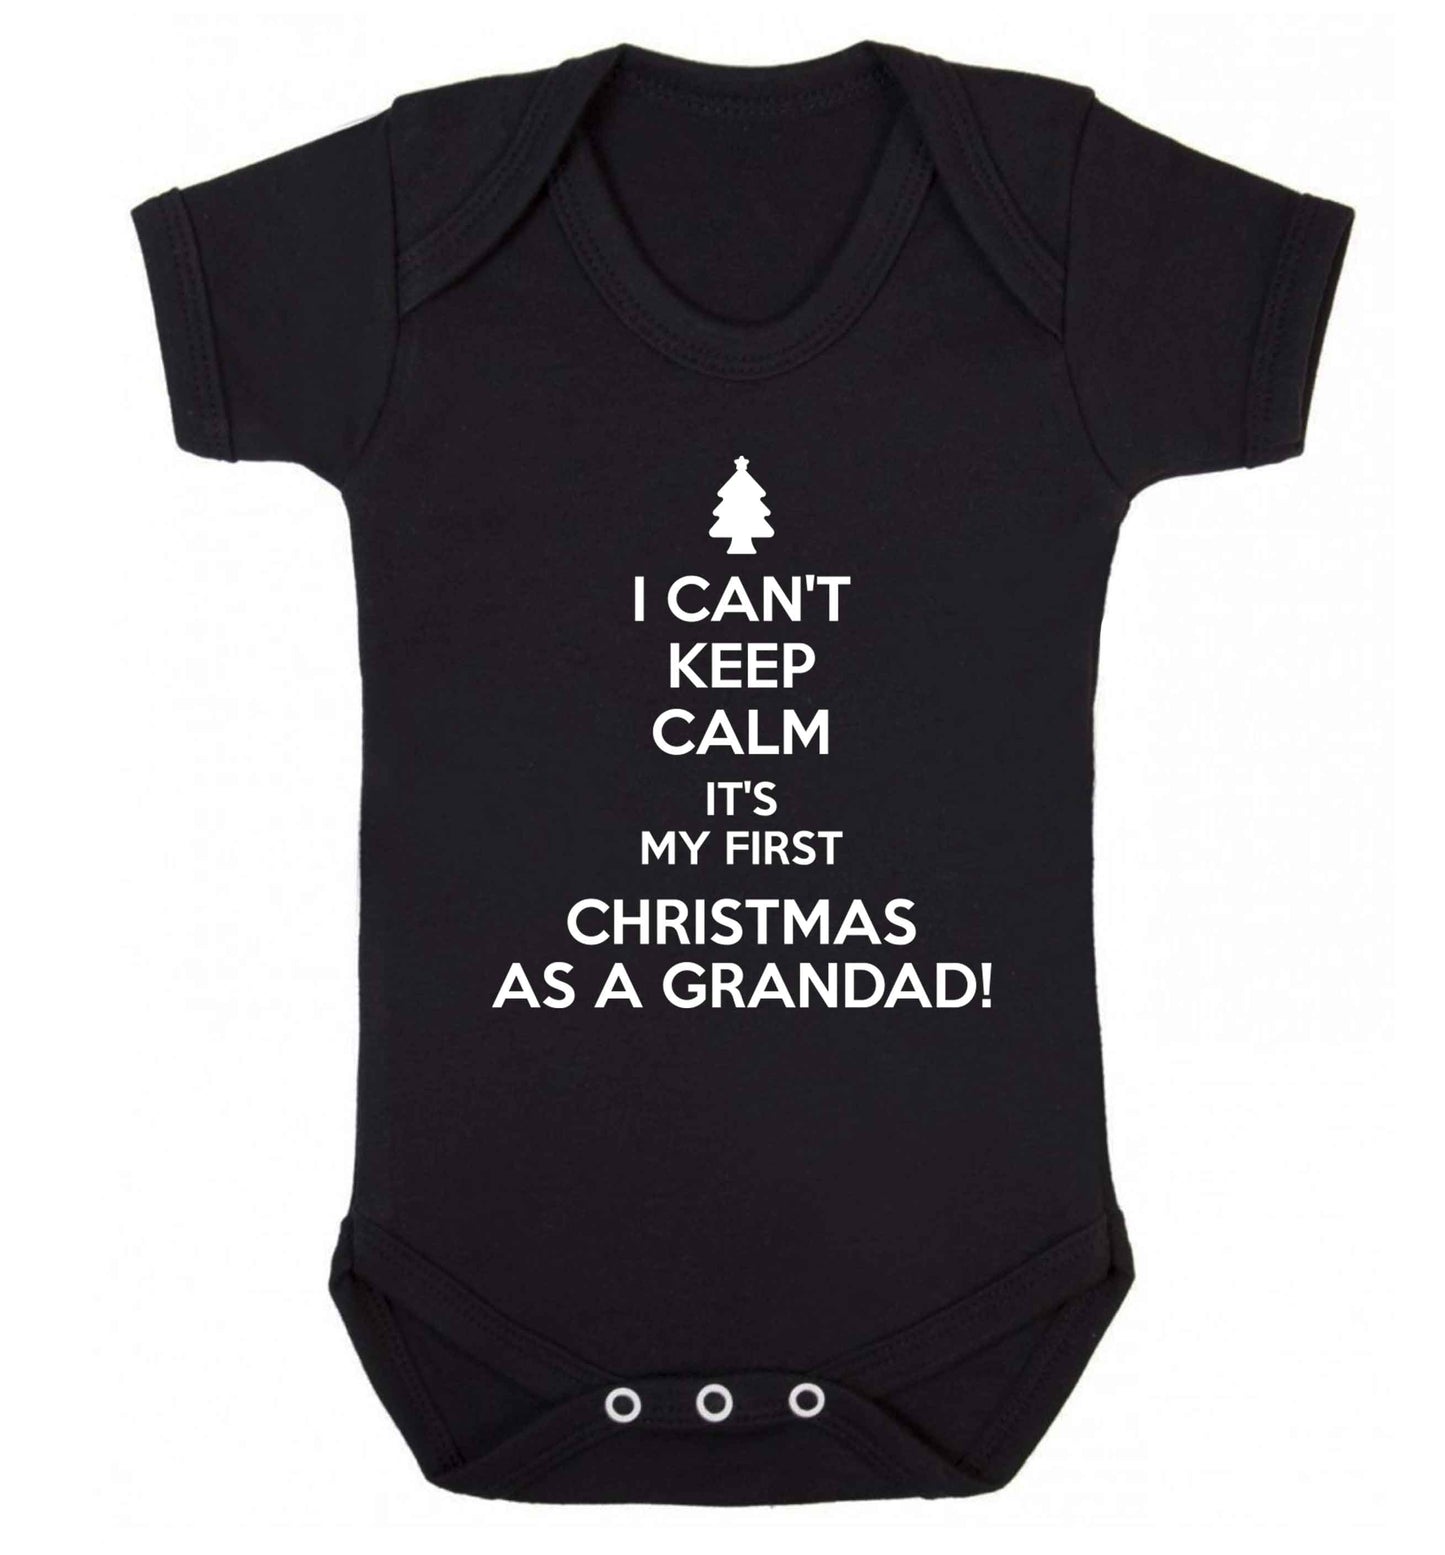 I can't keep calm it's my first Christmas as a grandad! Baby Vest black 18-24 months